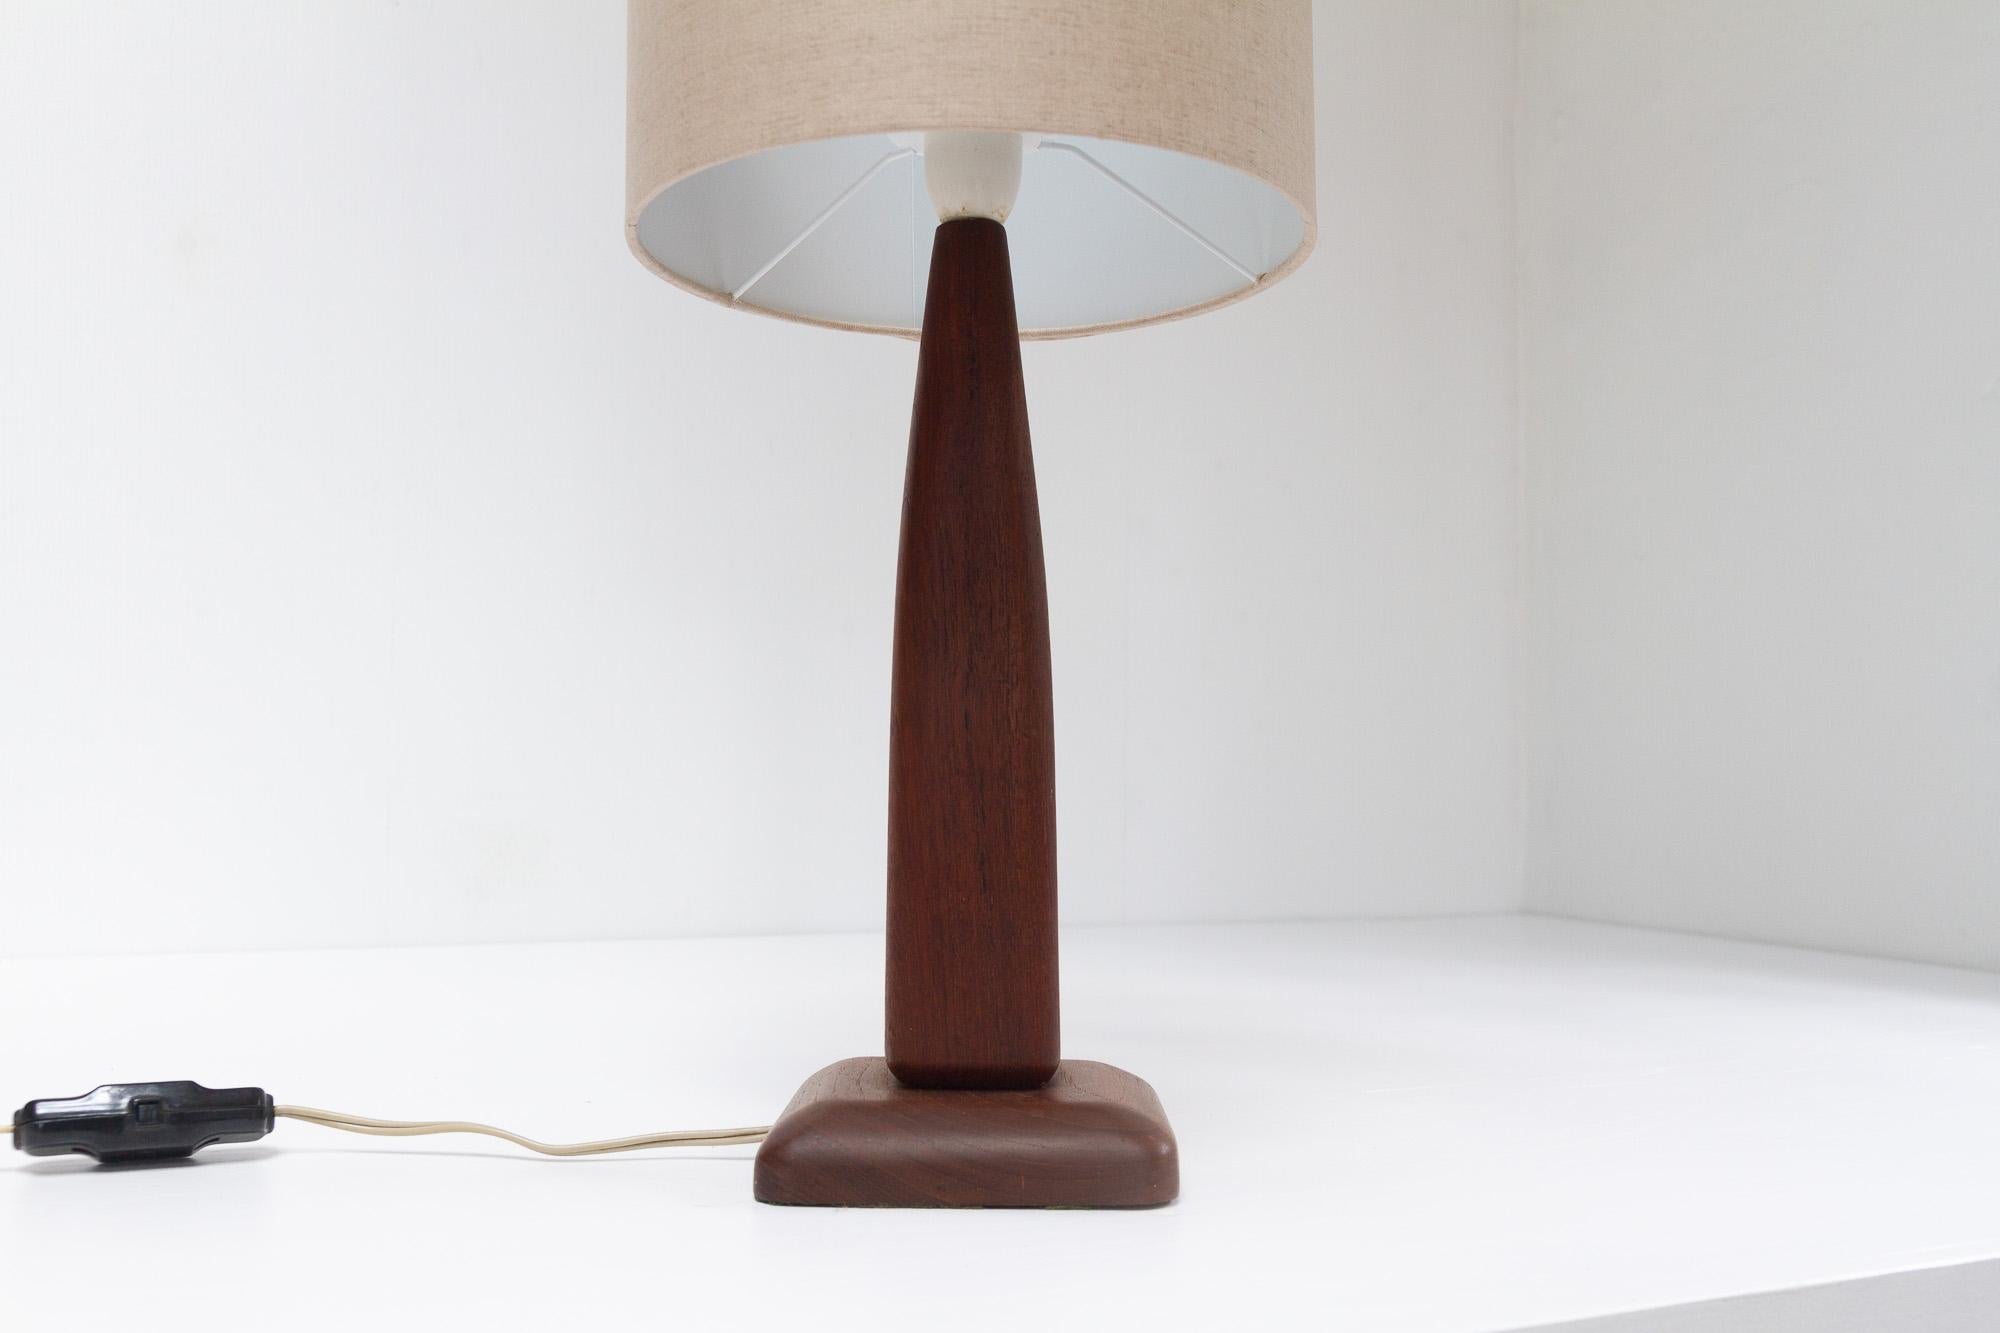 Vintage Danish Teak Table Lamp, 1960s.
Classic and elegant Danish Mid-century modern table lamp in solid teak manufactured in Denmark in the 1960s. Square tapered body on a square base with white socket. Beige textile shade.
Height of teak base: 34